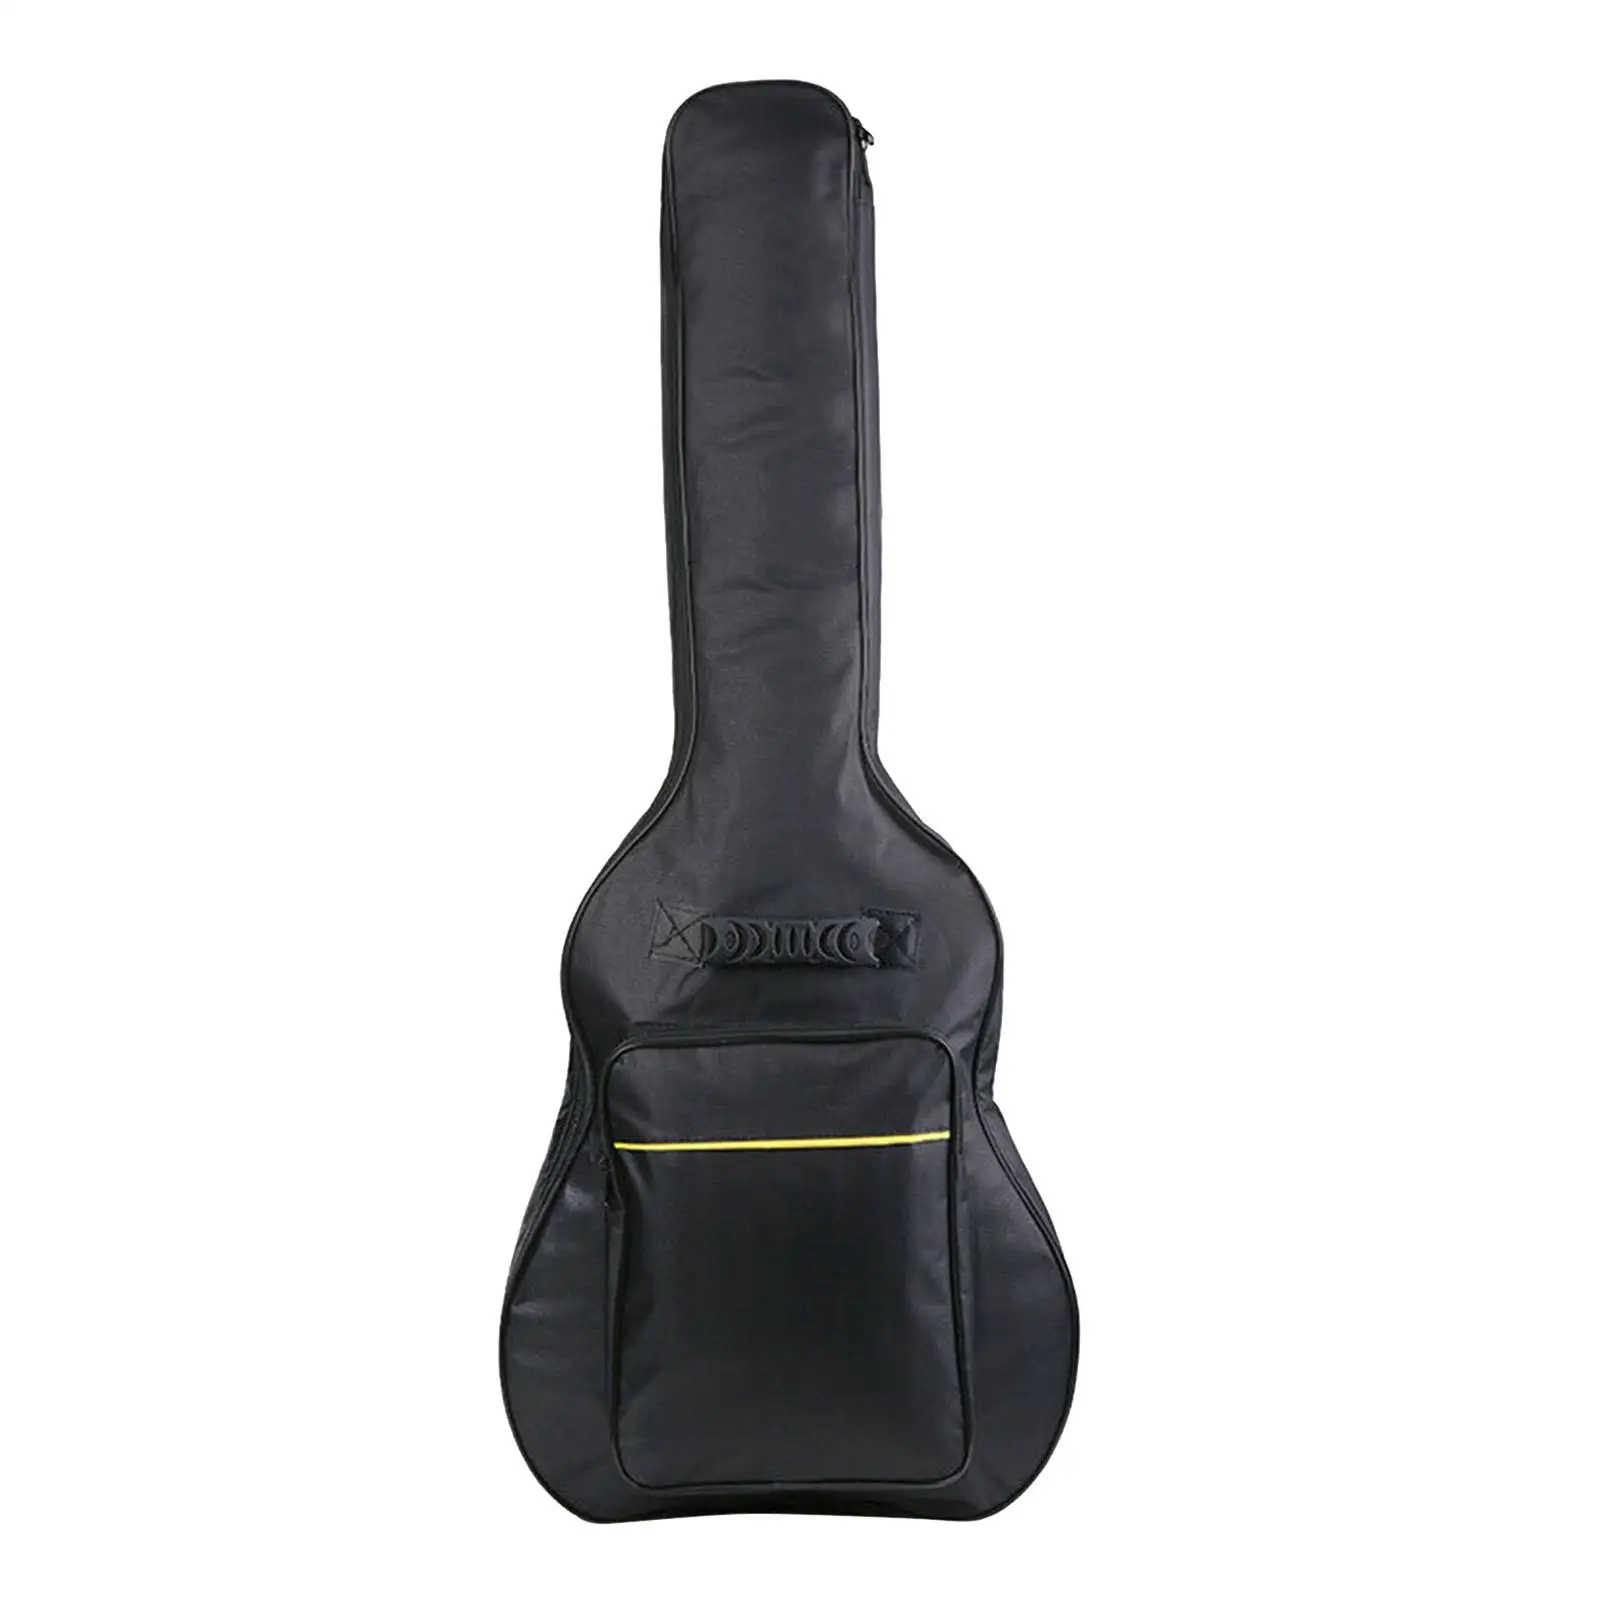 Guitar Bag Full Size Thick 12mm Padding Water-Resistant Oxford Cloth 